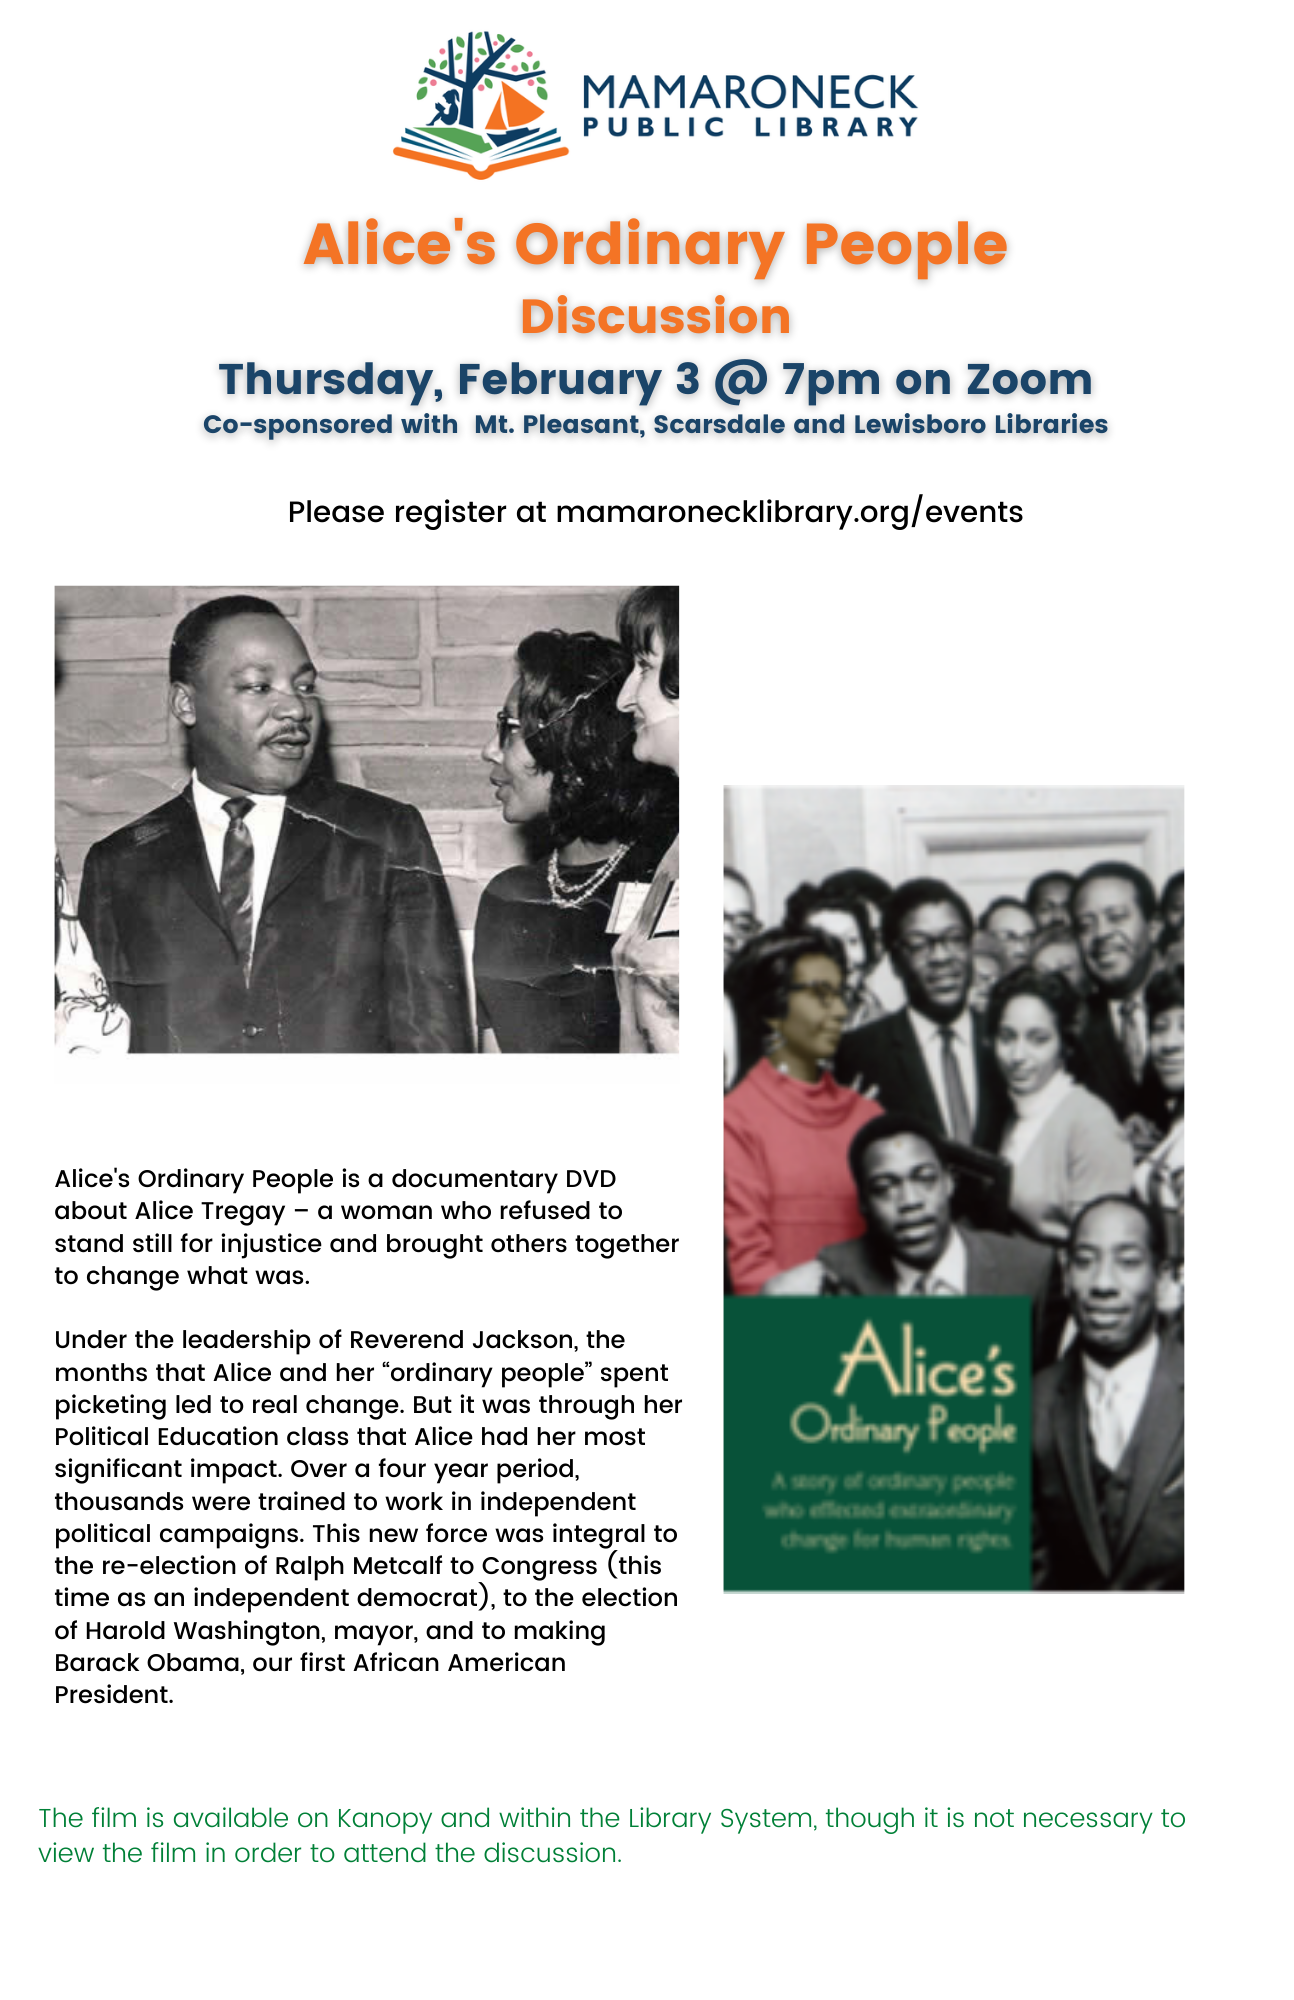 Feb. 3 2022 Zoom discussion of film documentary, Alice's Ordinary People